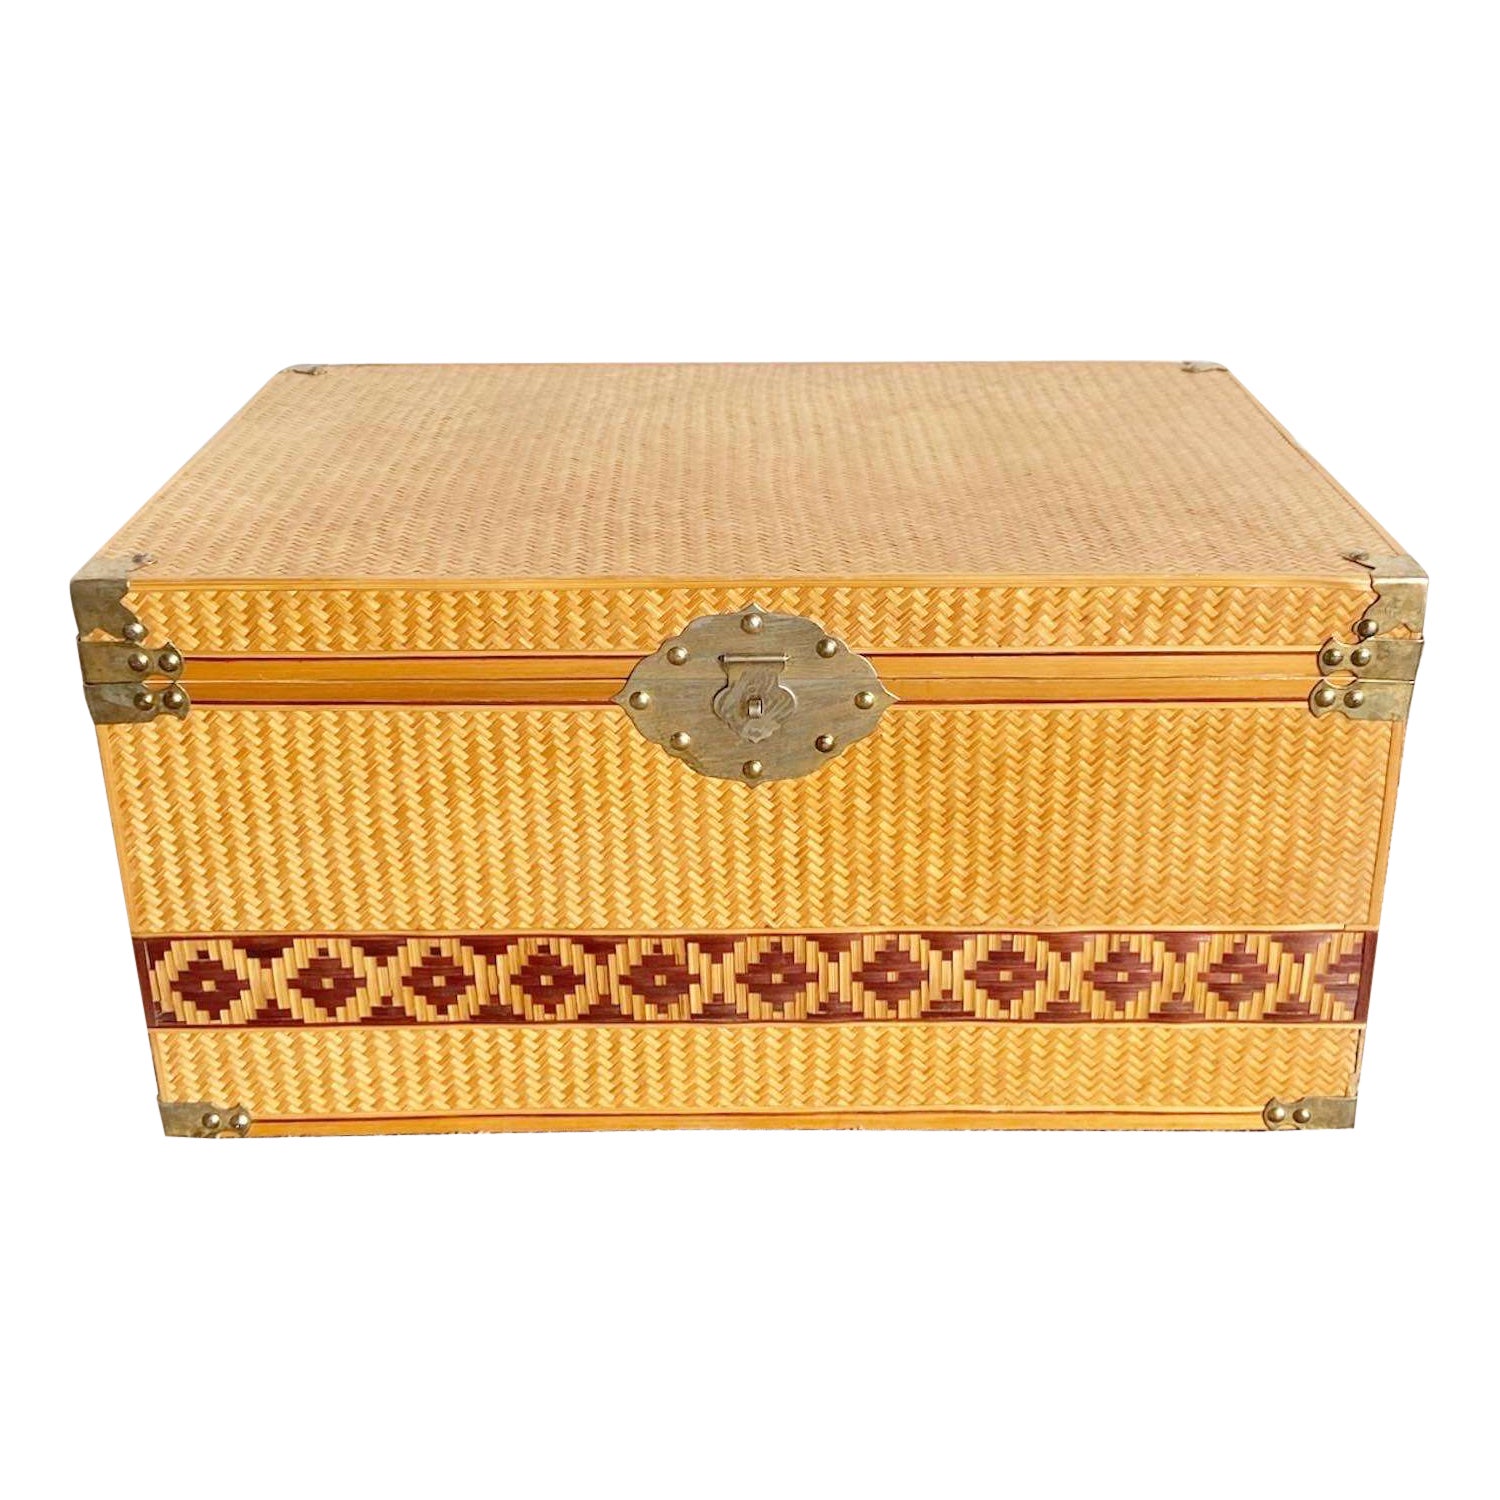 Boho Chic Wicker Trunk/Storage Chest For Sale